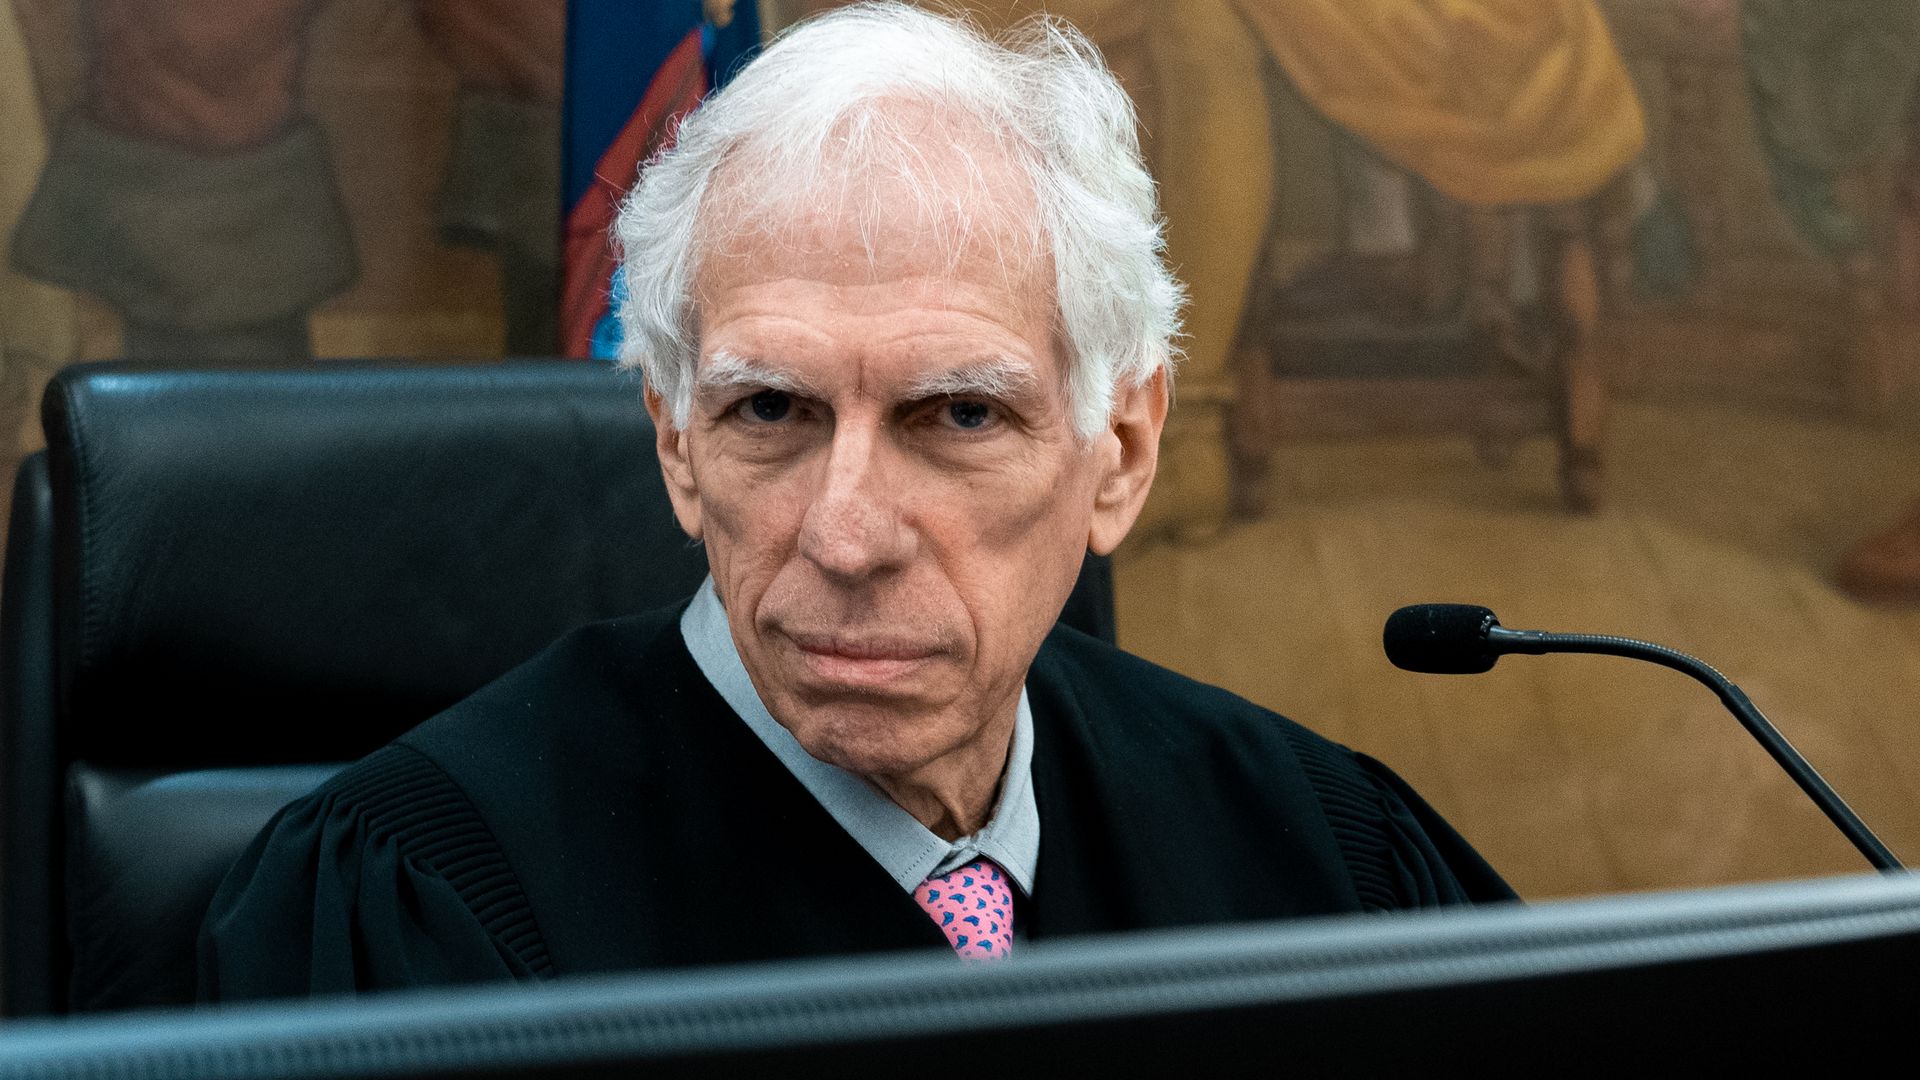 Judge Arthur Engoron, the man presiding over Donald Trump's NY fraud trial, is clearly left-wing, anti-Trump, and all out for himself.